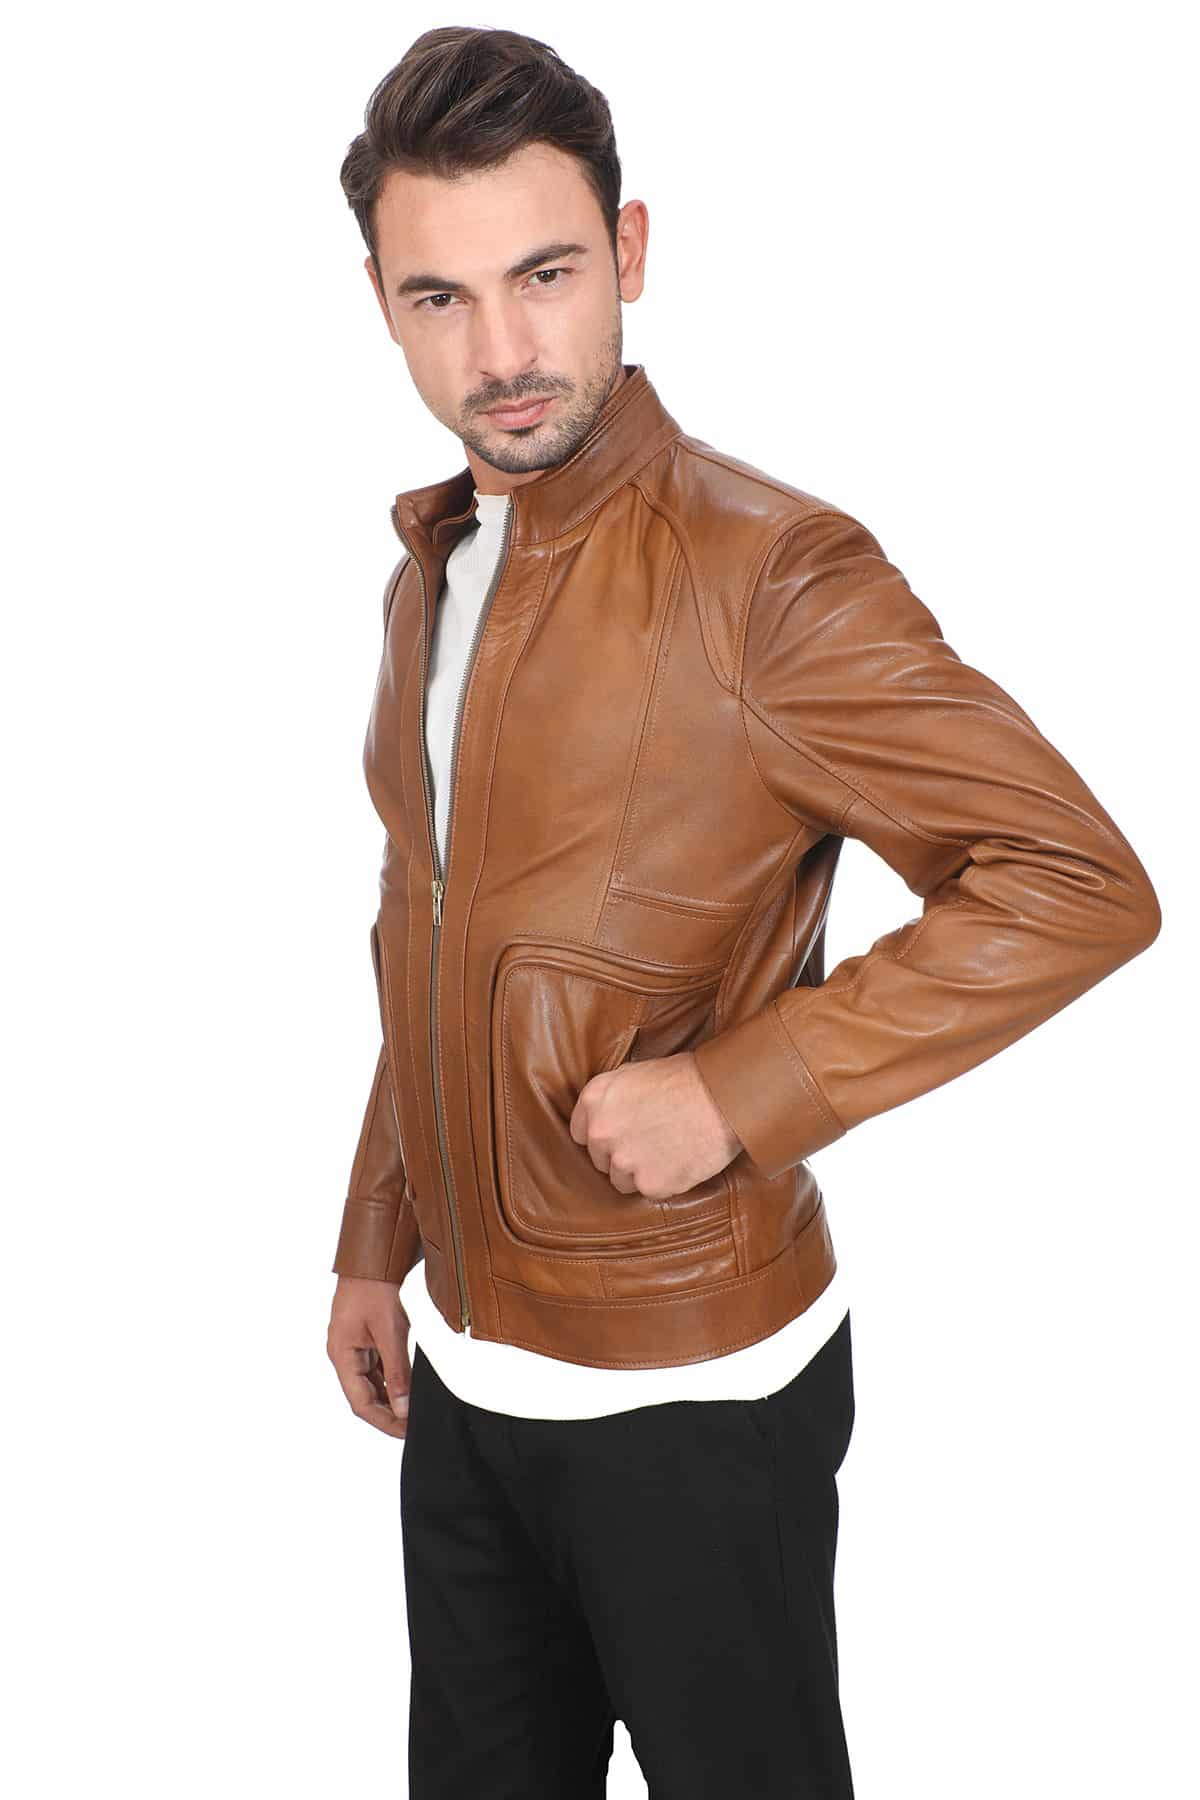 Authentic Leather Jackets